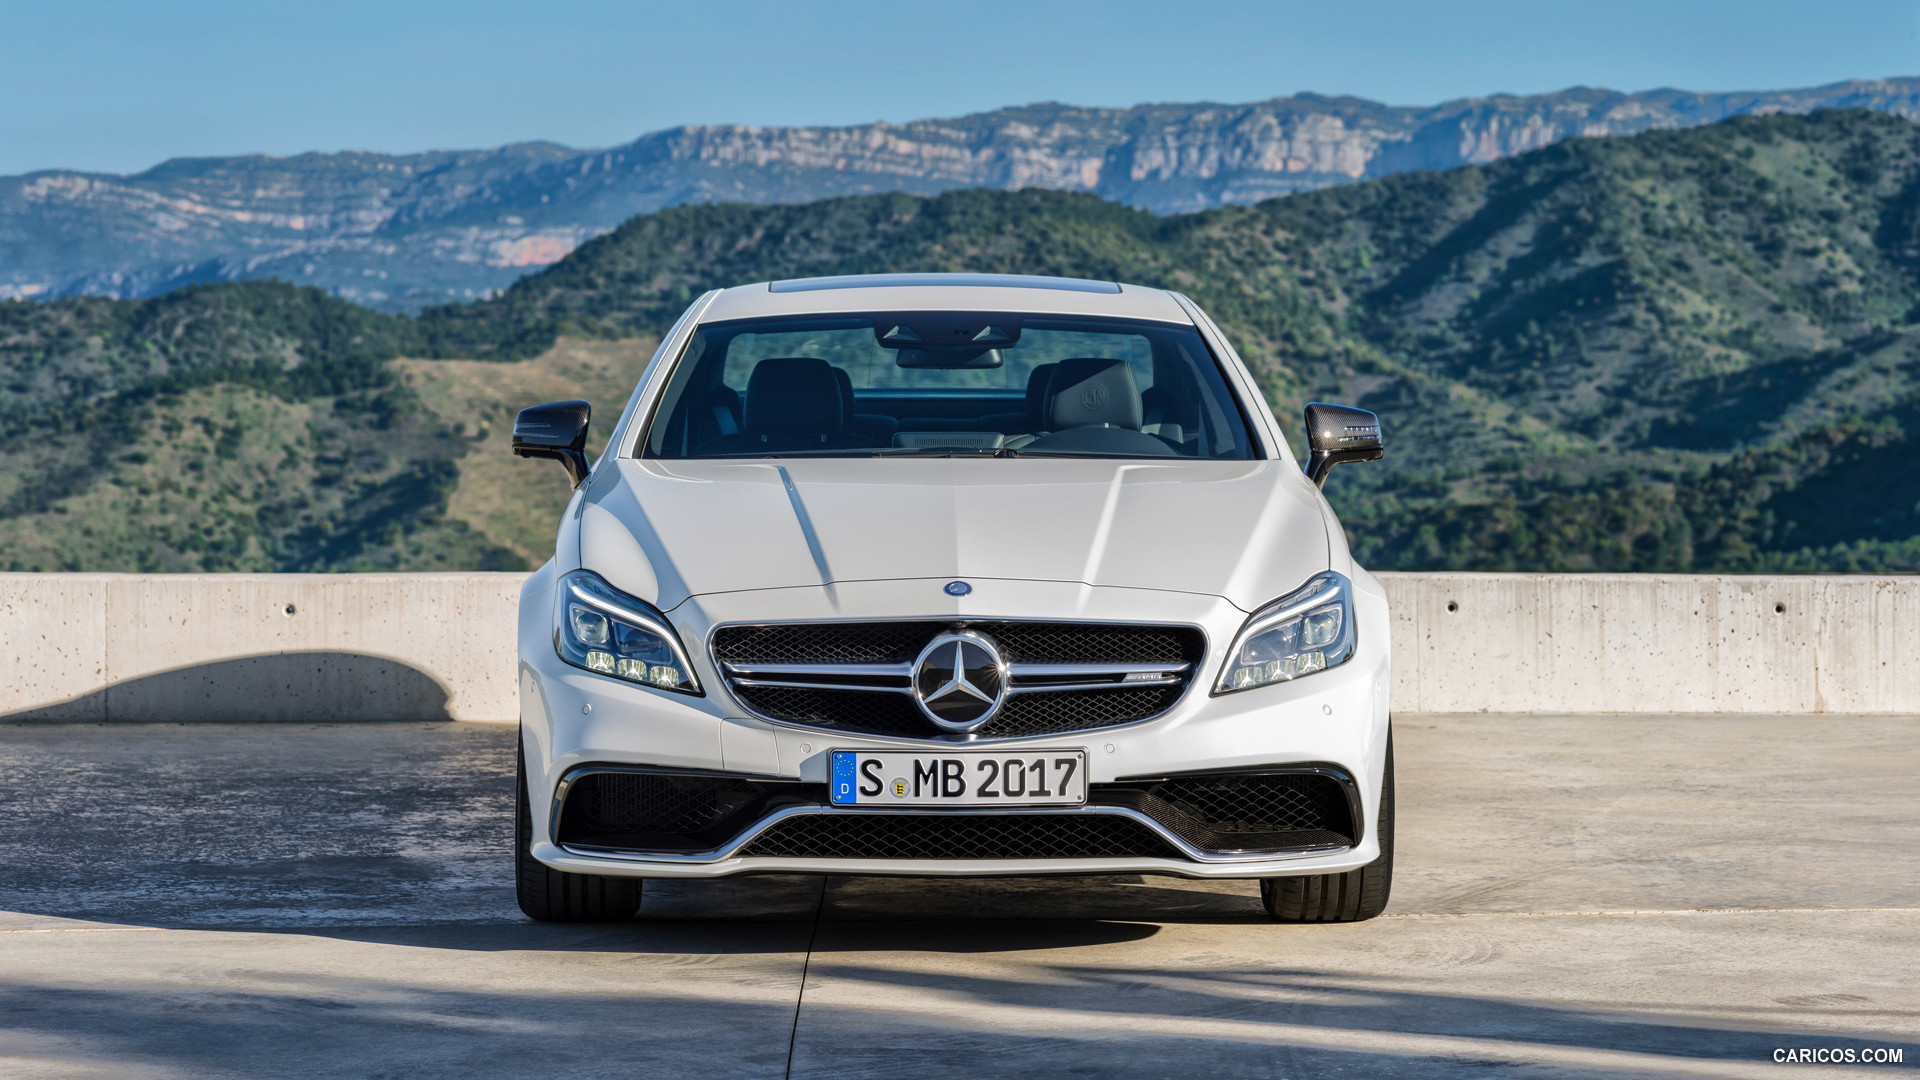 2015 Mercedes-Benz CLS 63 AMG S-Model - Front, #26 of 51